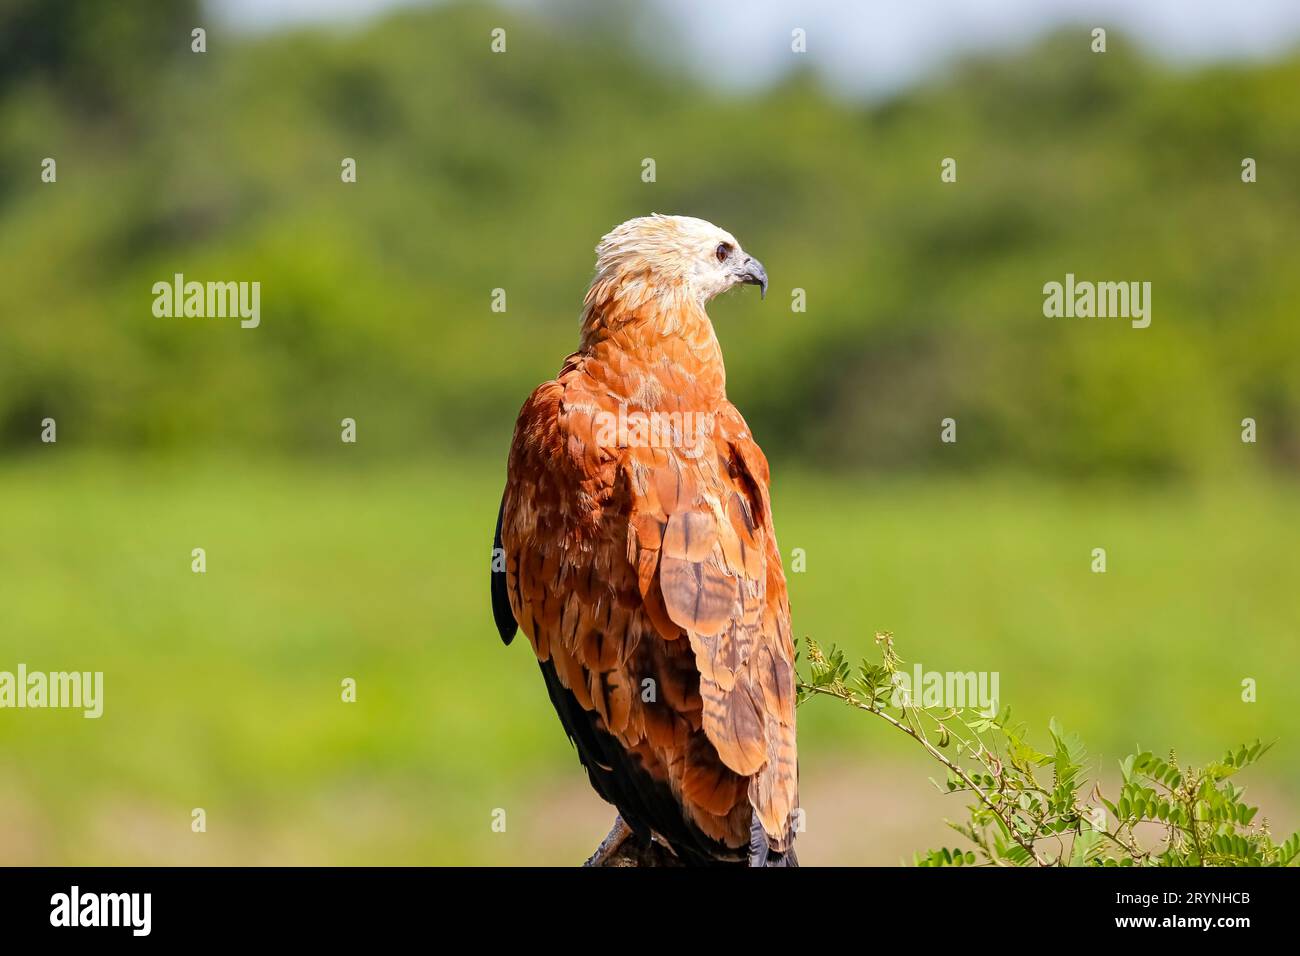 Close-up of a Black-collared hawk from back, face to the right against green natural background, Pan Stock Photo